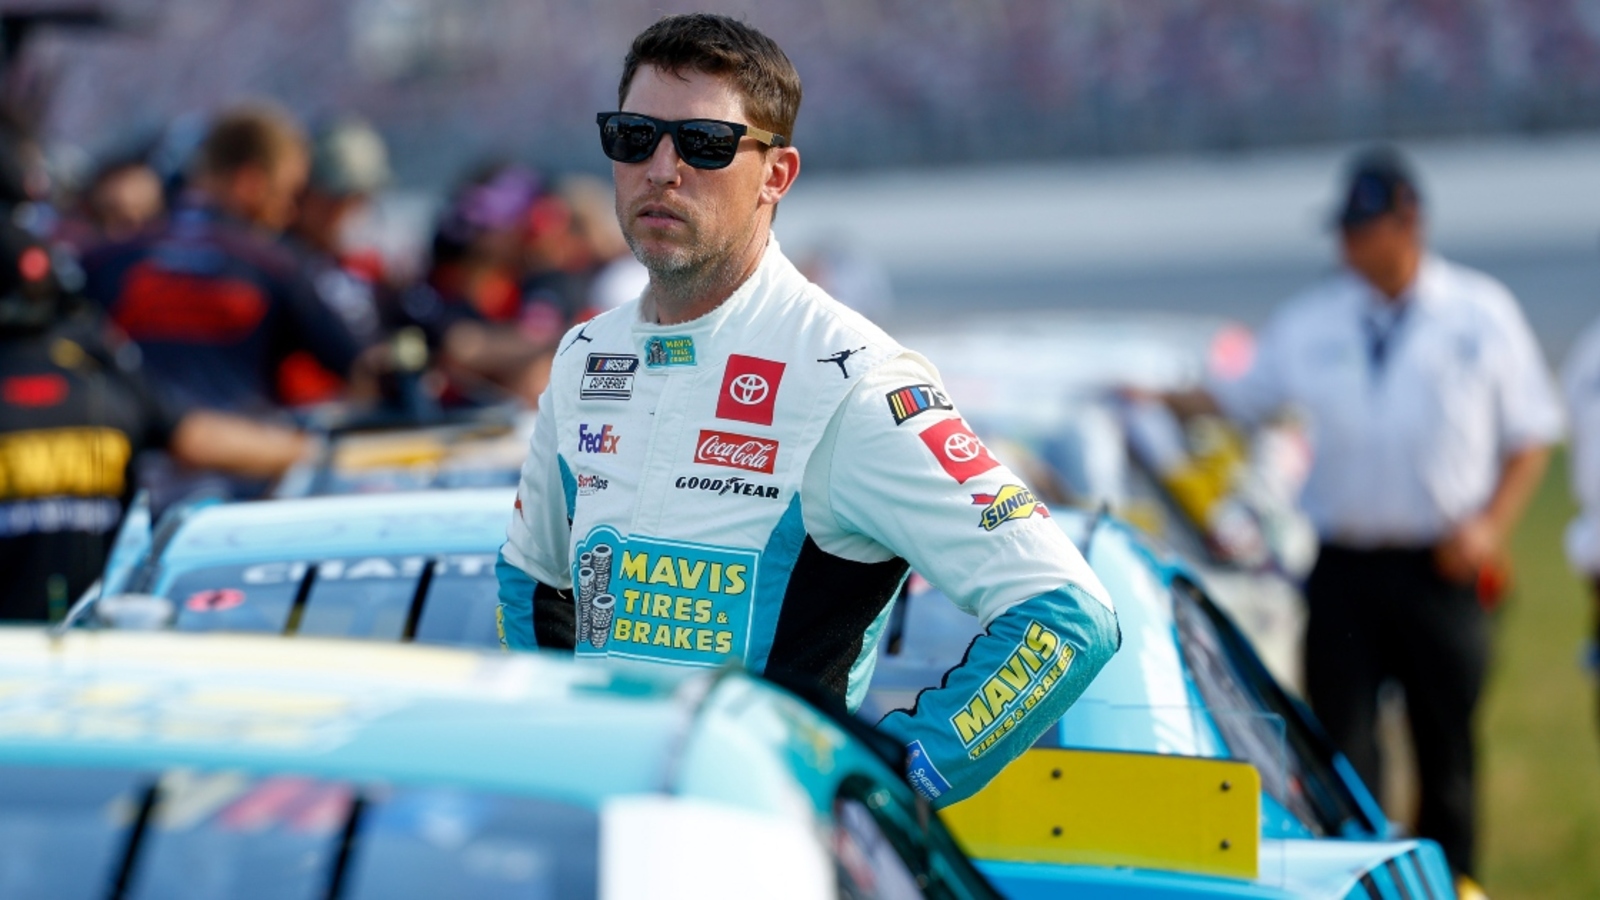 Denny Hamlin says Ricky Stenhouse Jr. had to fight Kyle Busch after his previous comments